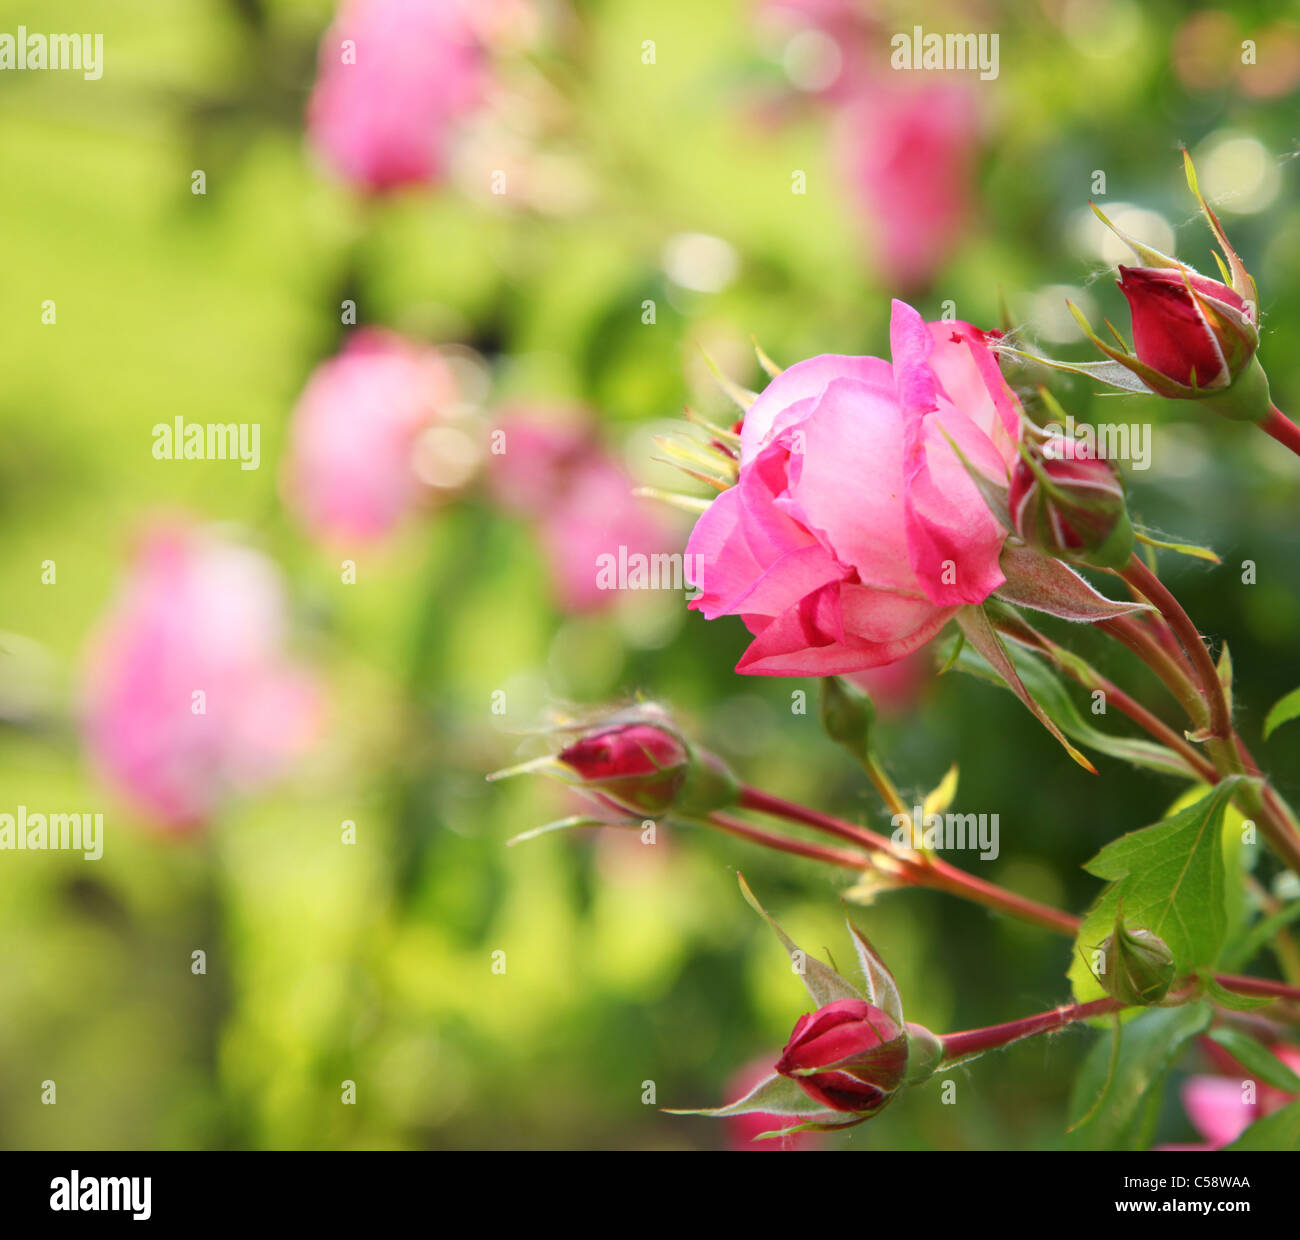 Beautiful Rose Flower High Resolution Stock Photography and Images - Alamy